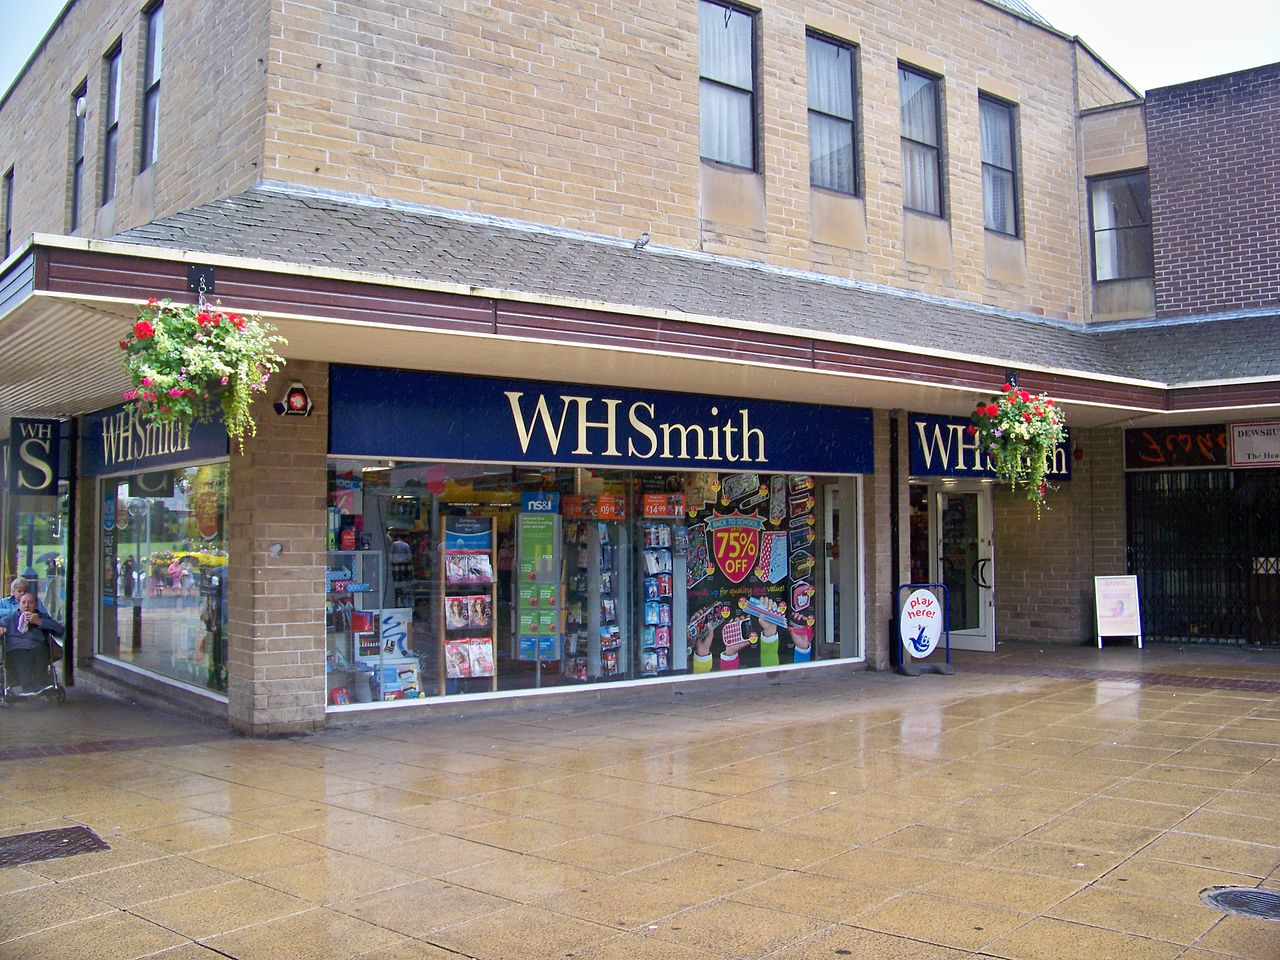 Cybercriminals target WH Smith, gaining access to employee data